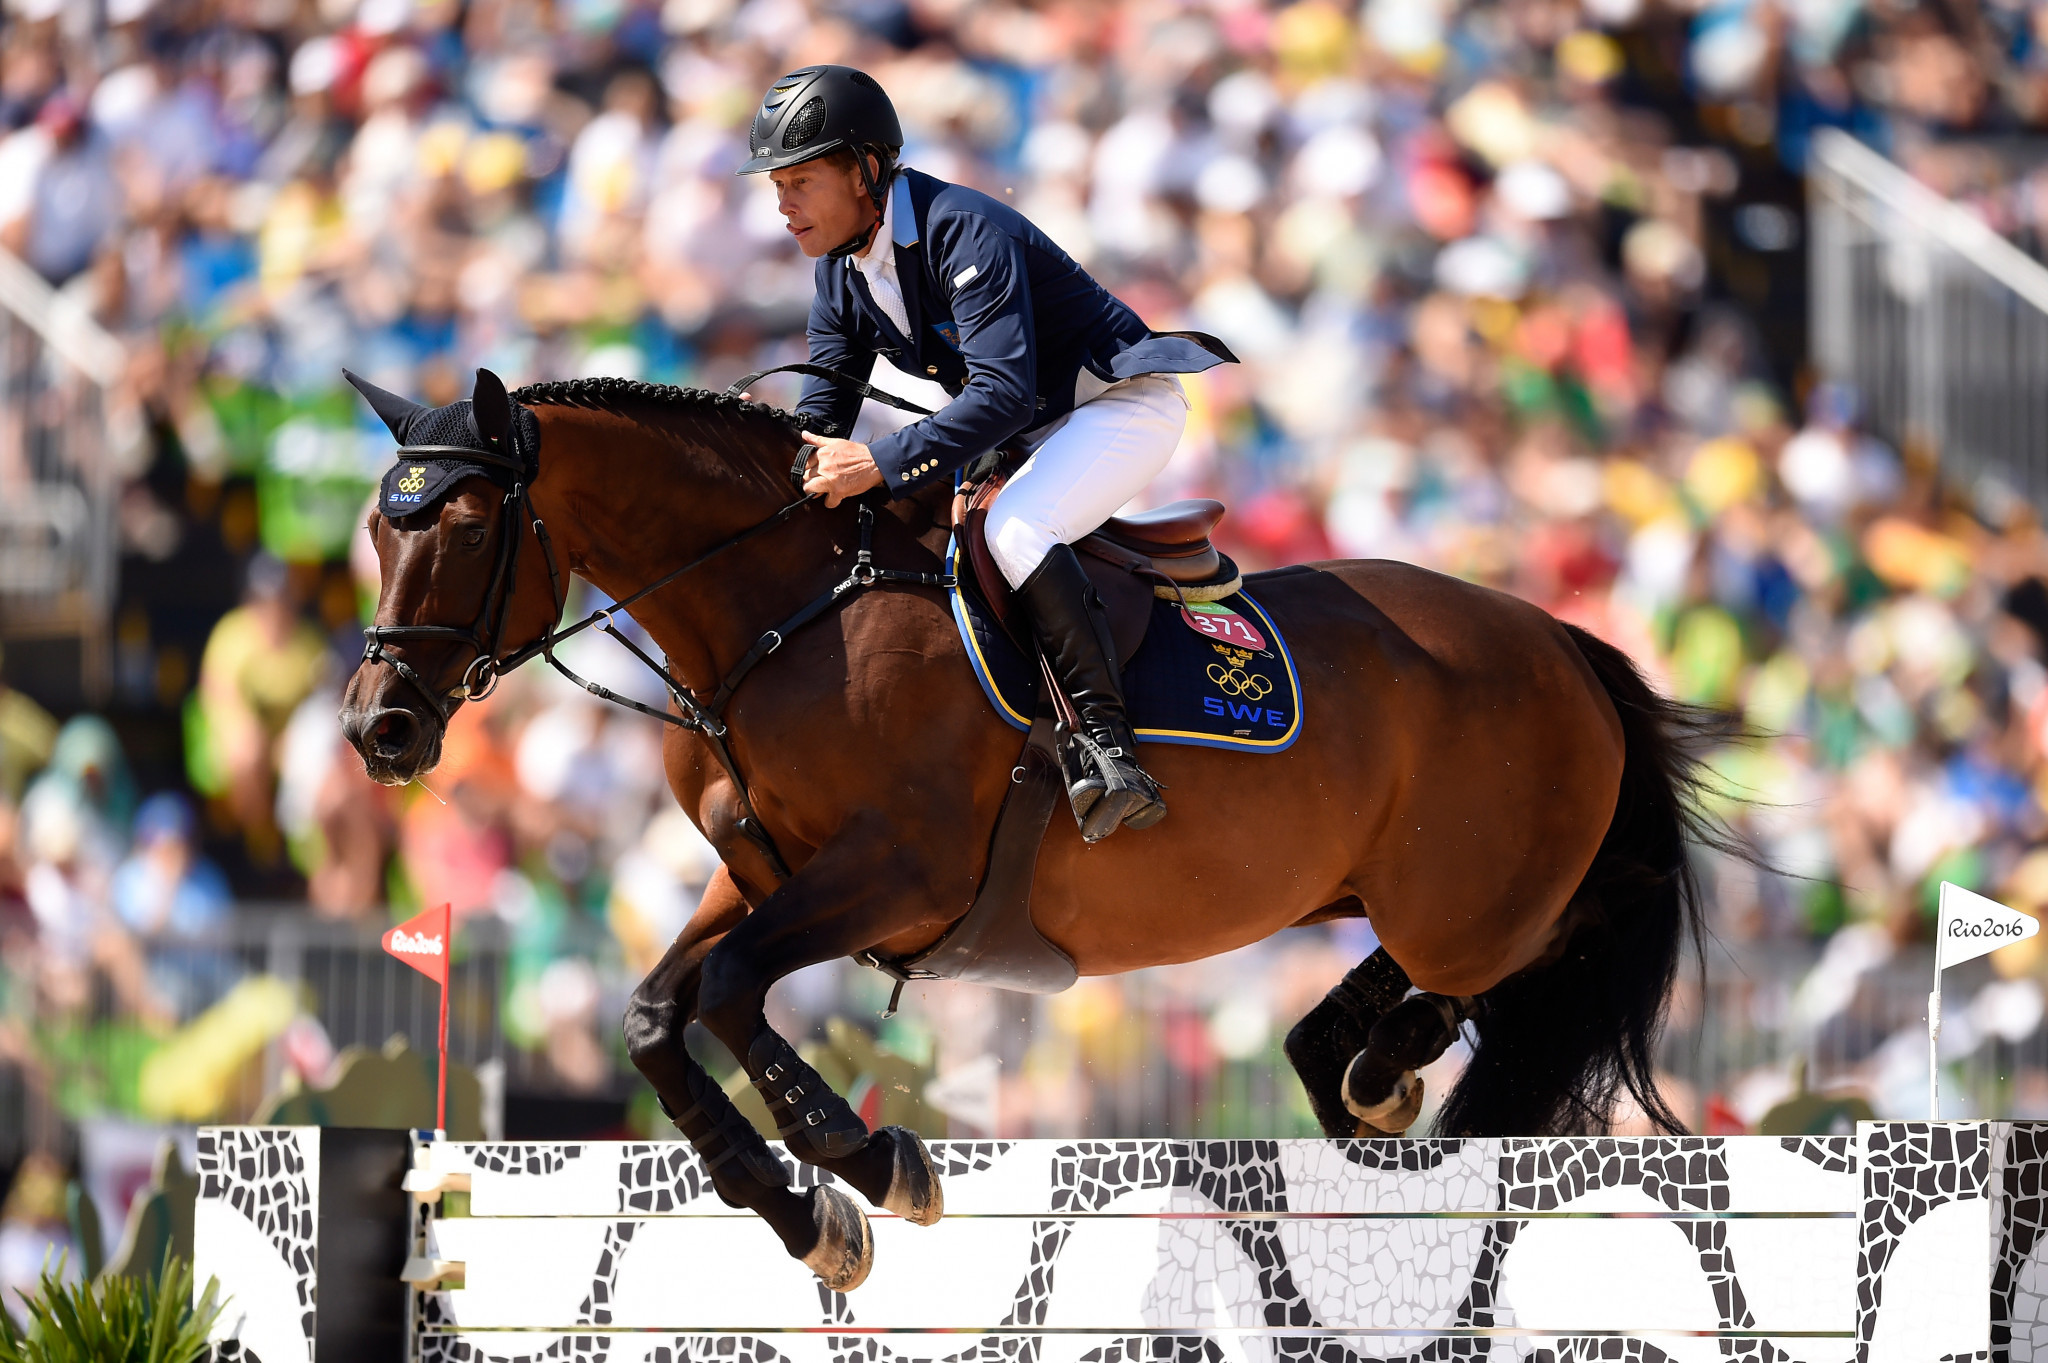 Rolf-Goran Bengtsson earned Sweden victory in a jump-off against Germany at the Longines Jumping Nations Cup in St Gallen ©Getty Images